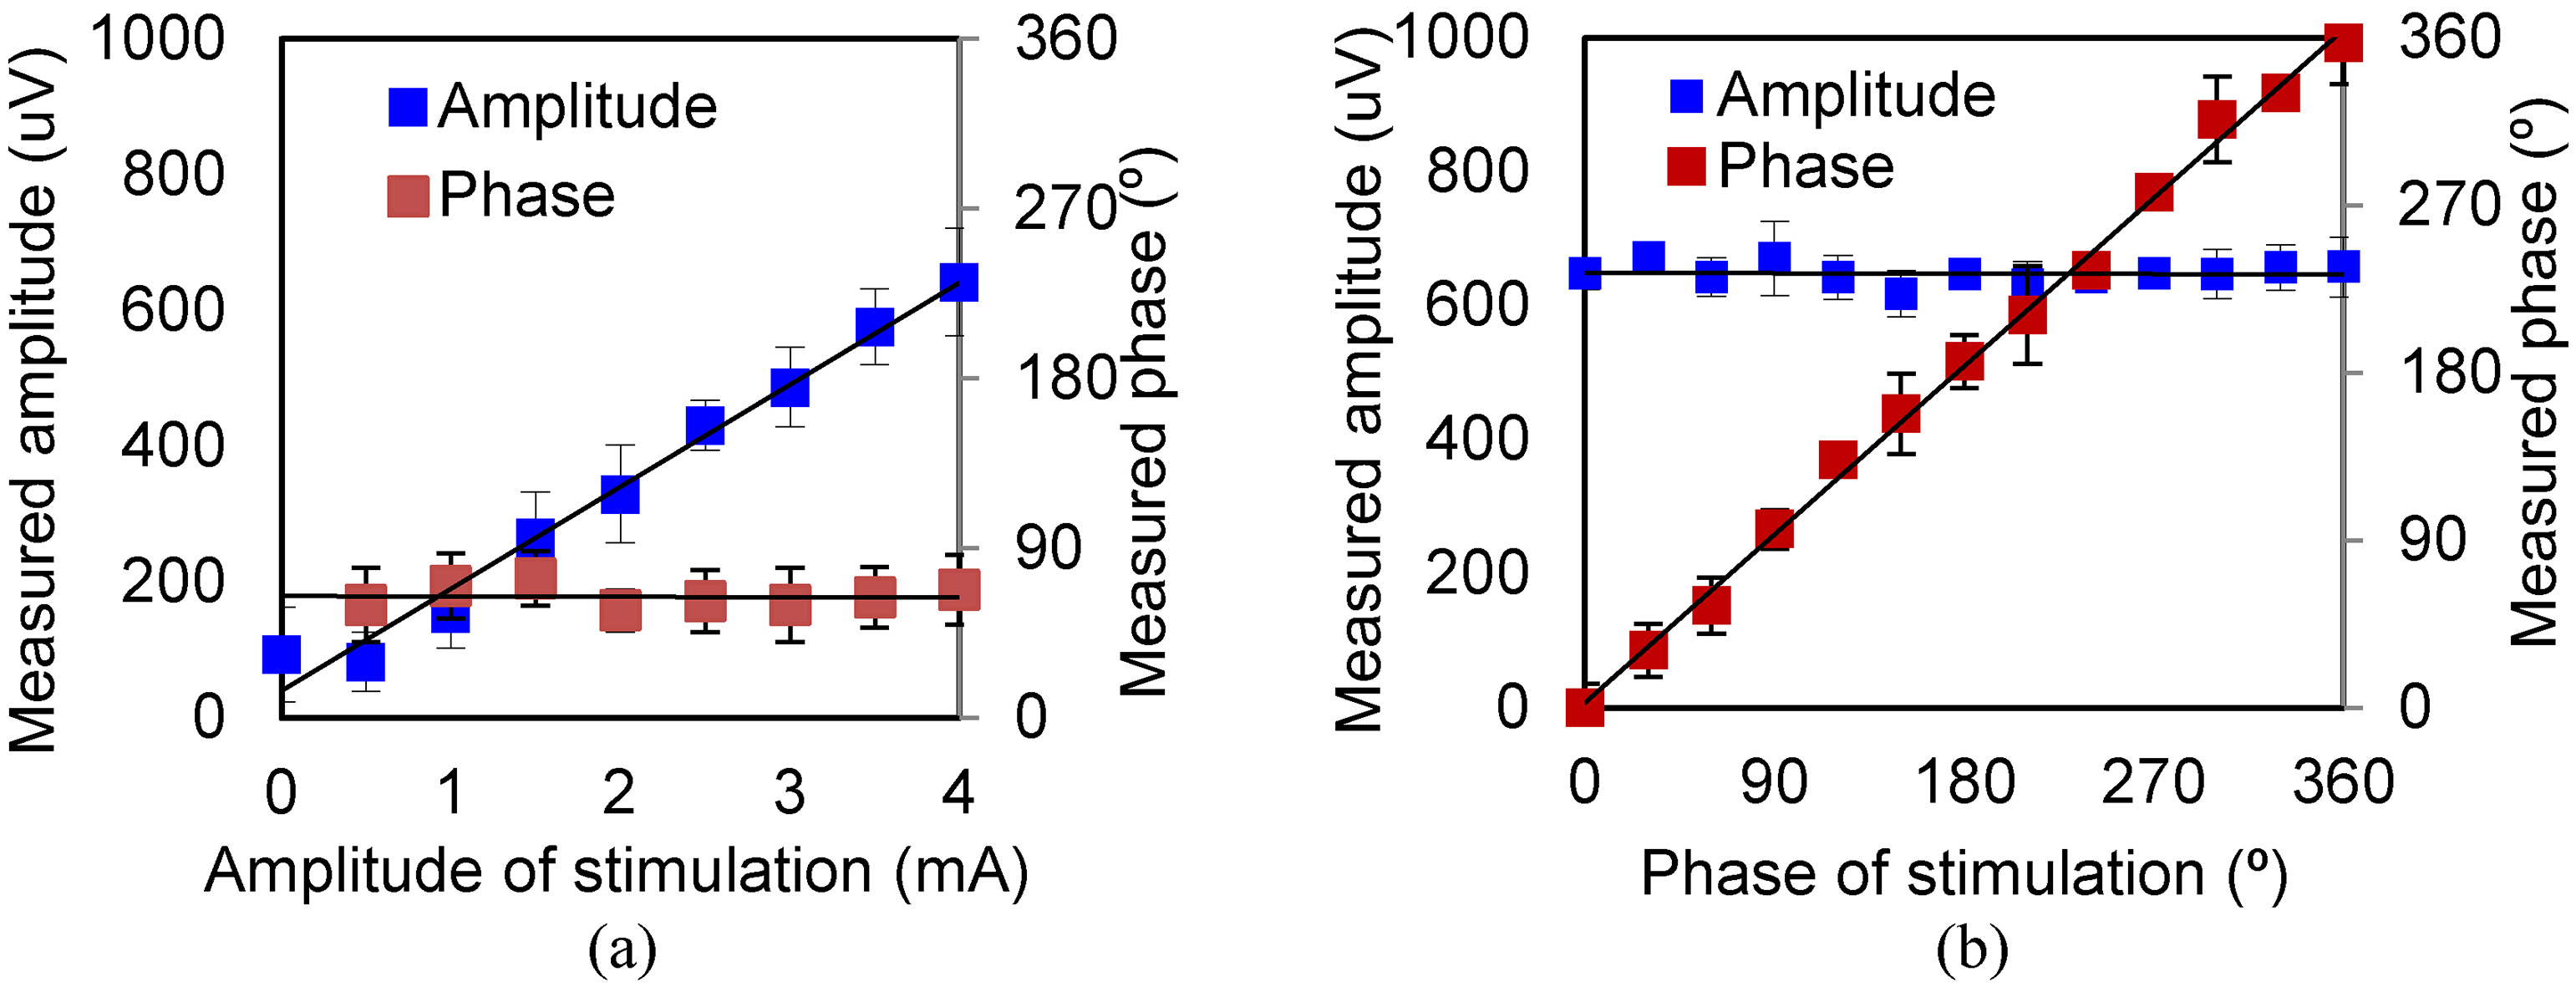 Amplitude and phase of MA signal under various levels of excitation (triangular wave). (a) Results for various exciting amplitudes. (b) Results for various exciting phases. 